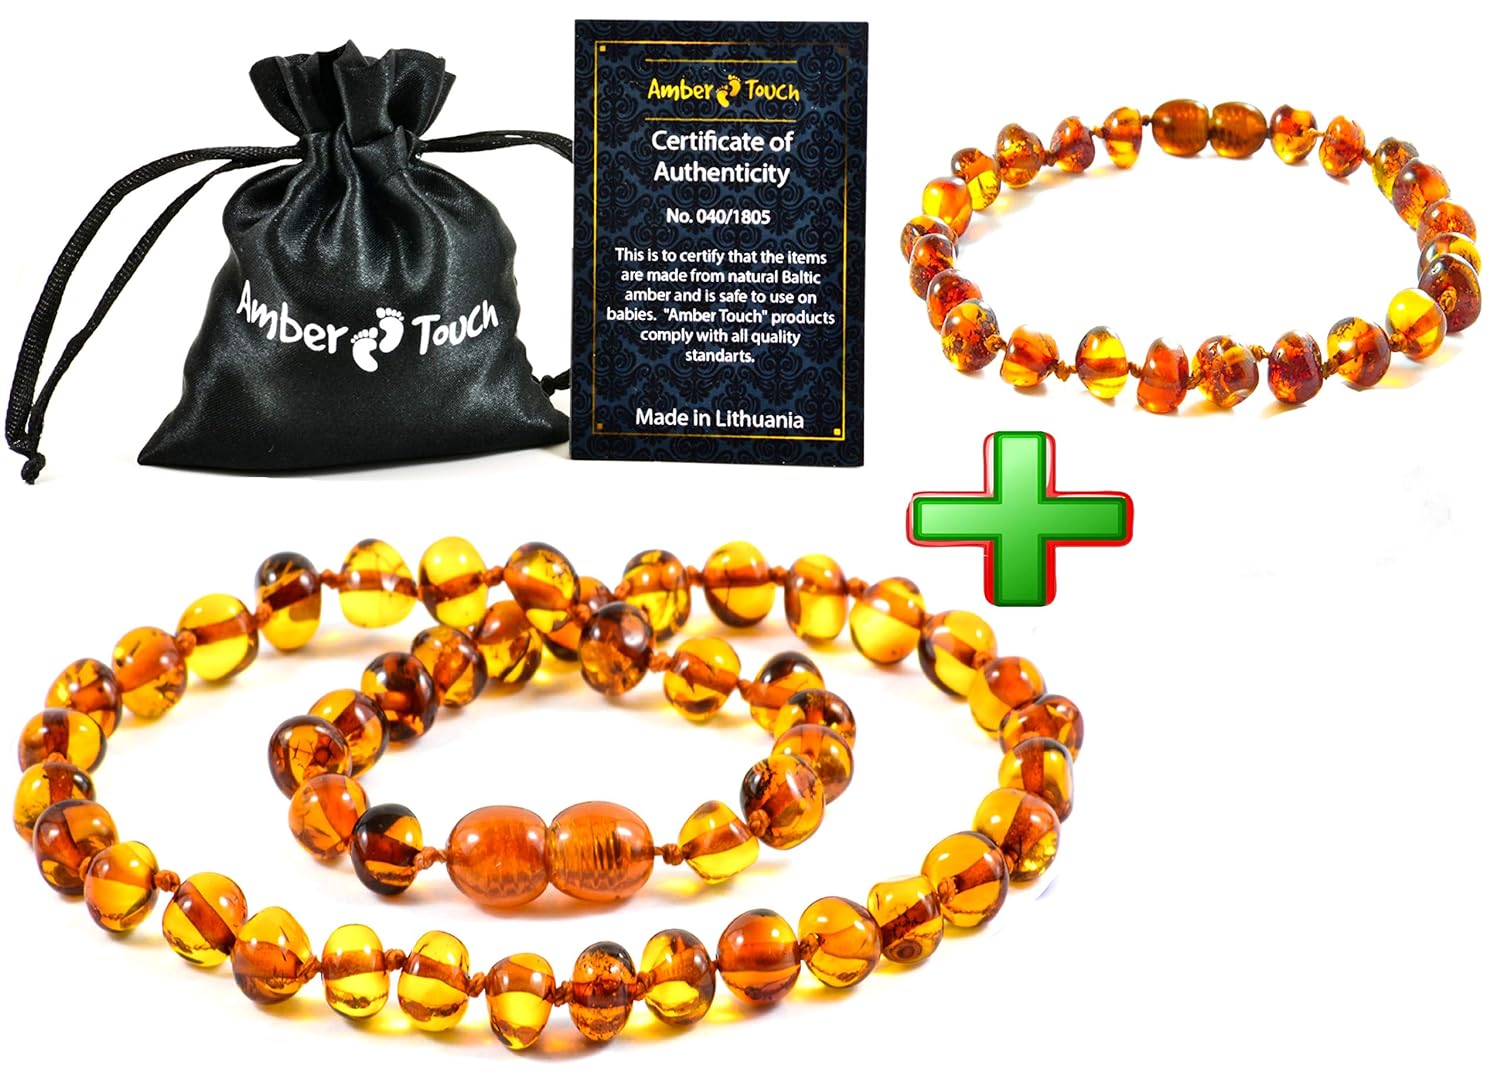 How Does an Amber Teething Necklace Work?